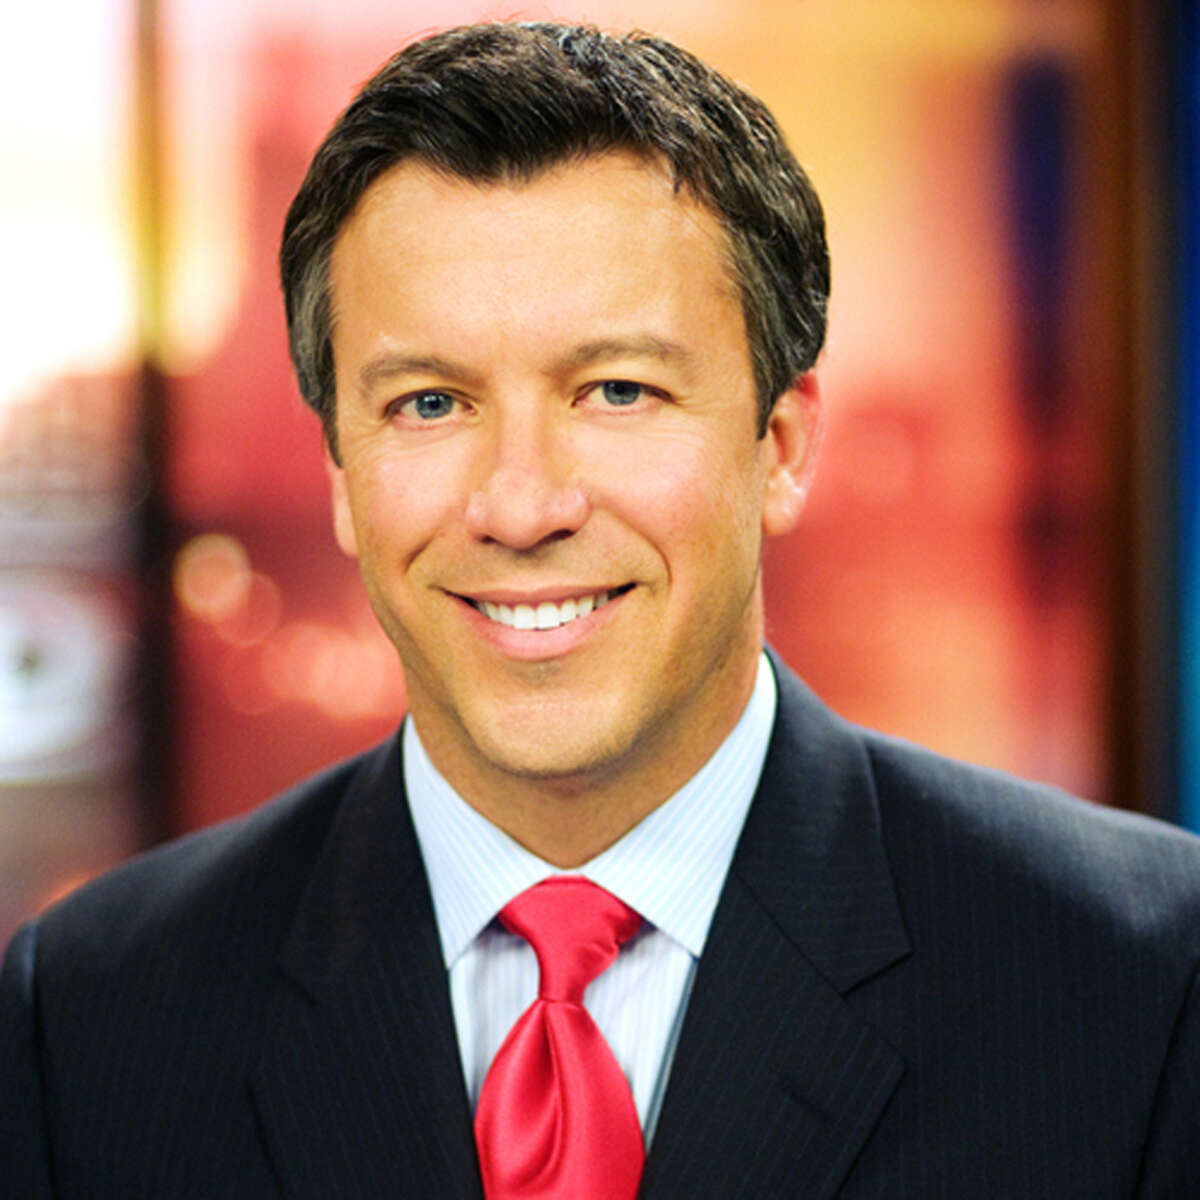 Jeff Vaughn, who replaced Chris Marrou at KENS-TV, is leaving the station after 2 1/2 years.